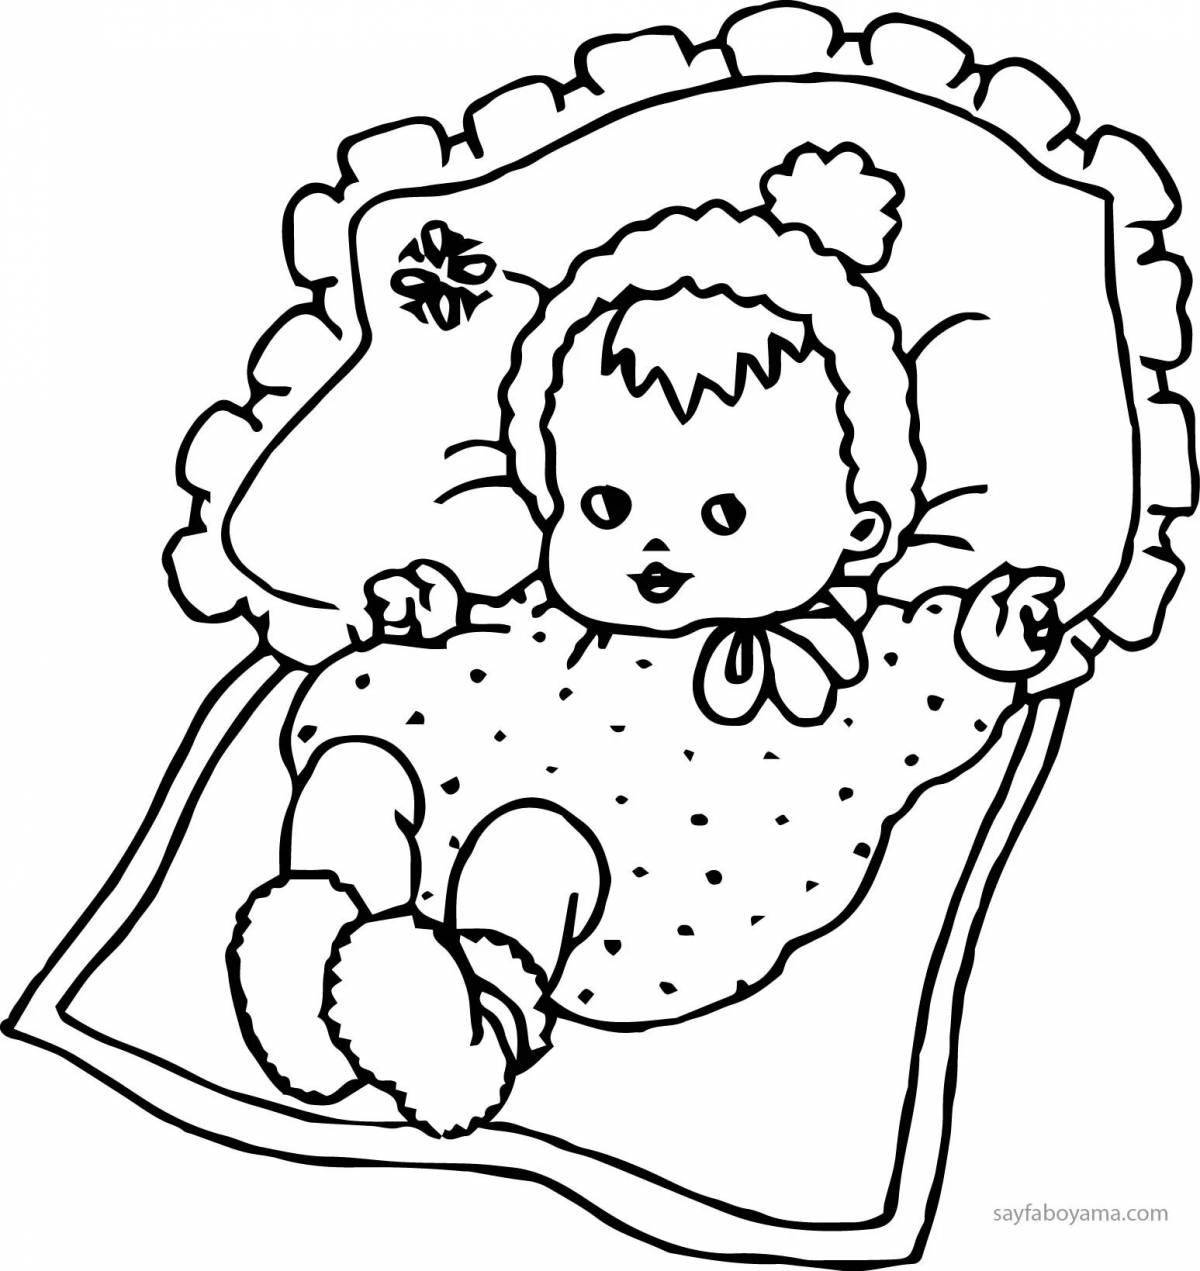 Coloring book funny doll with a bed